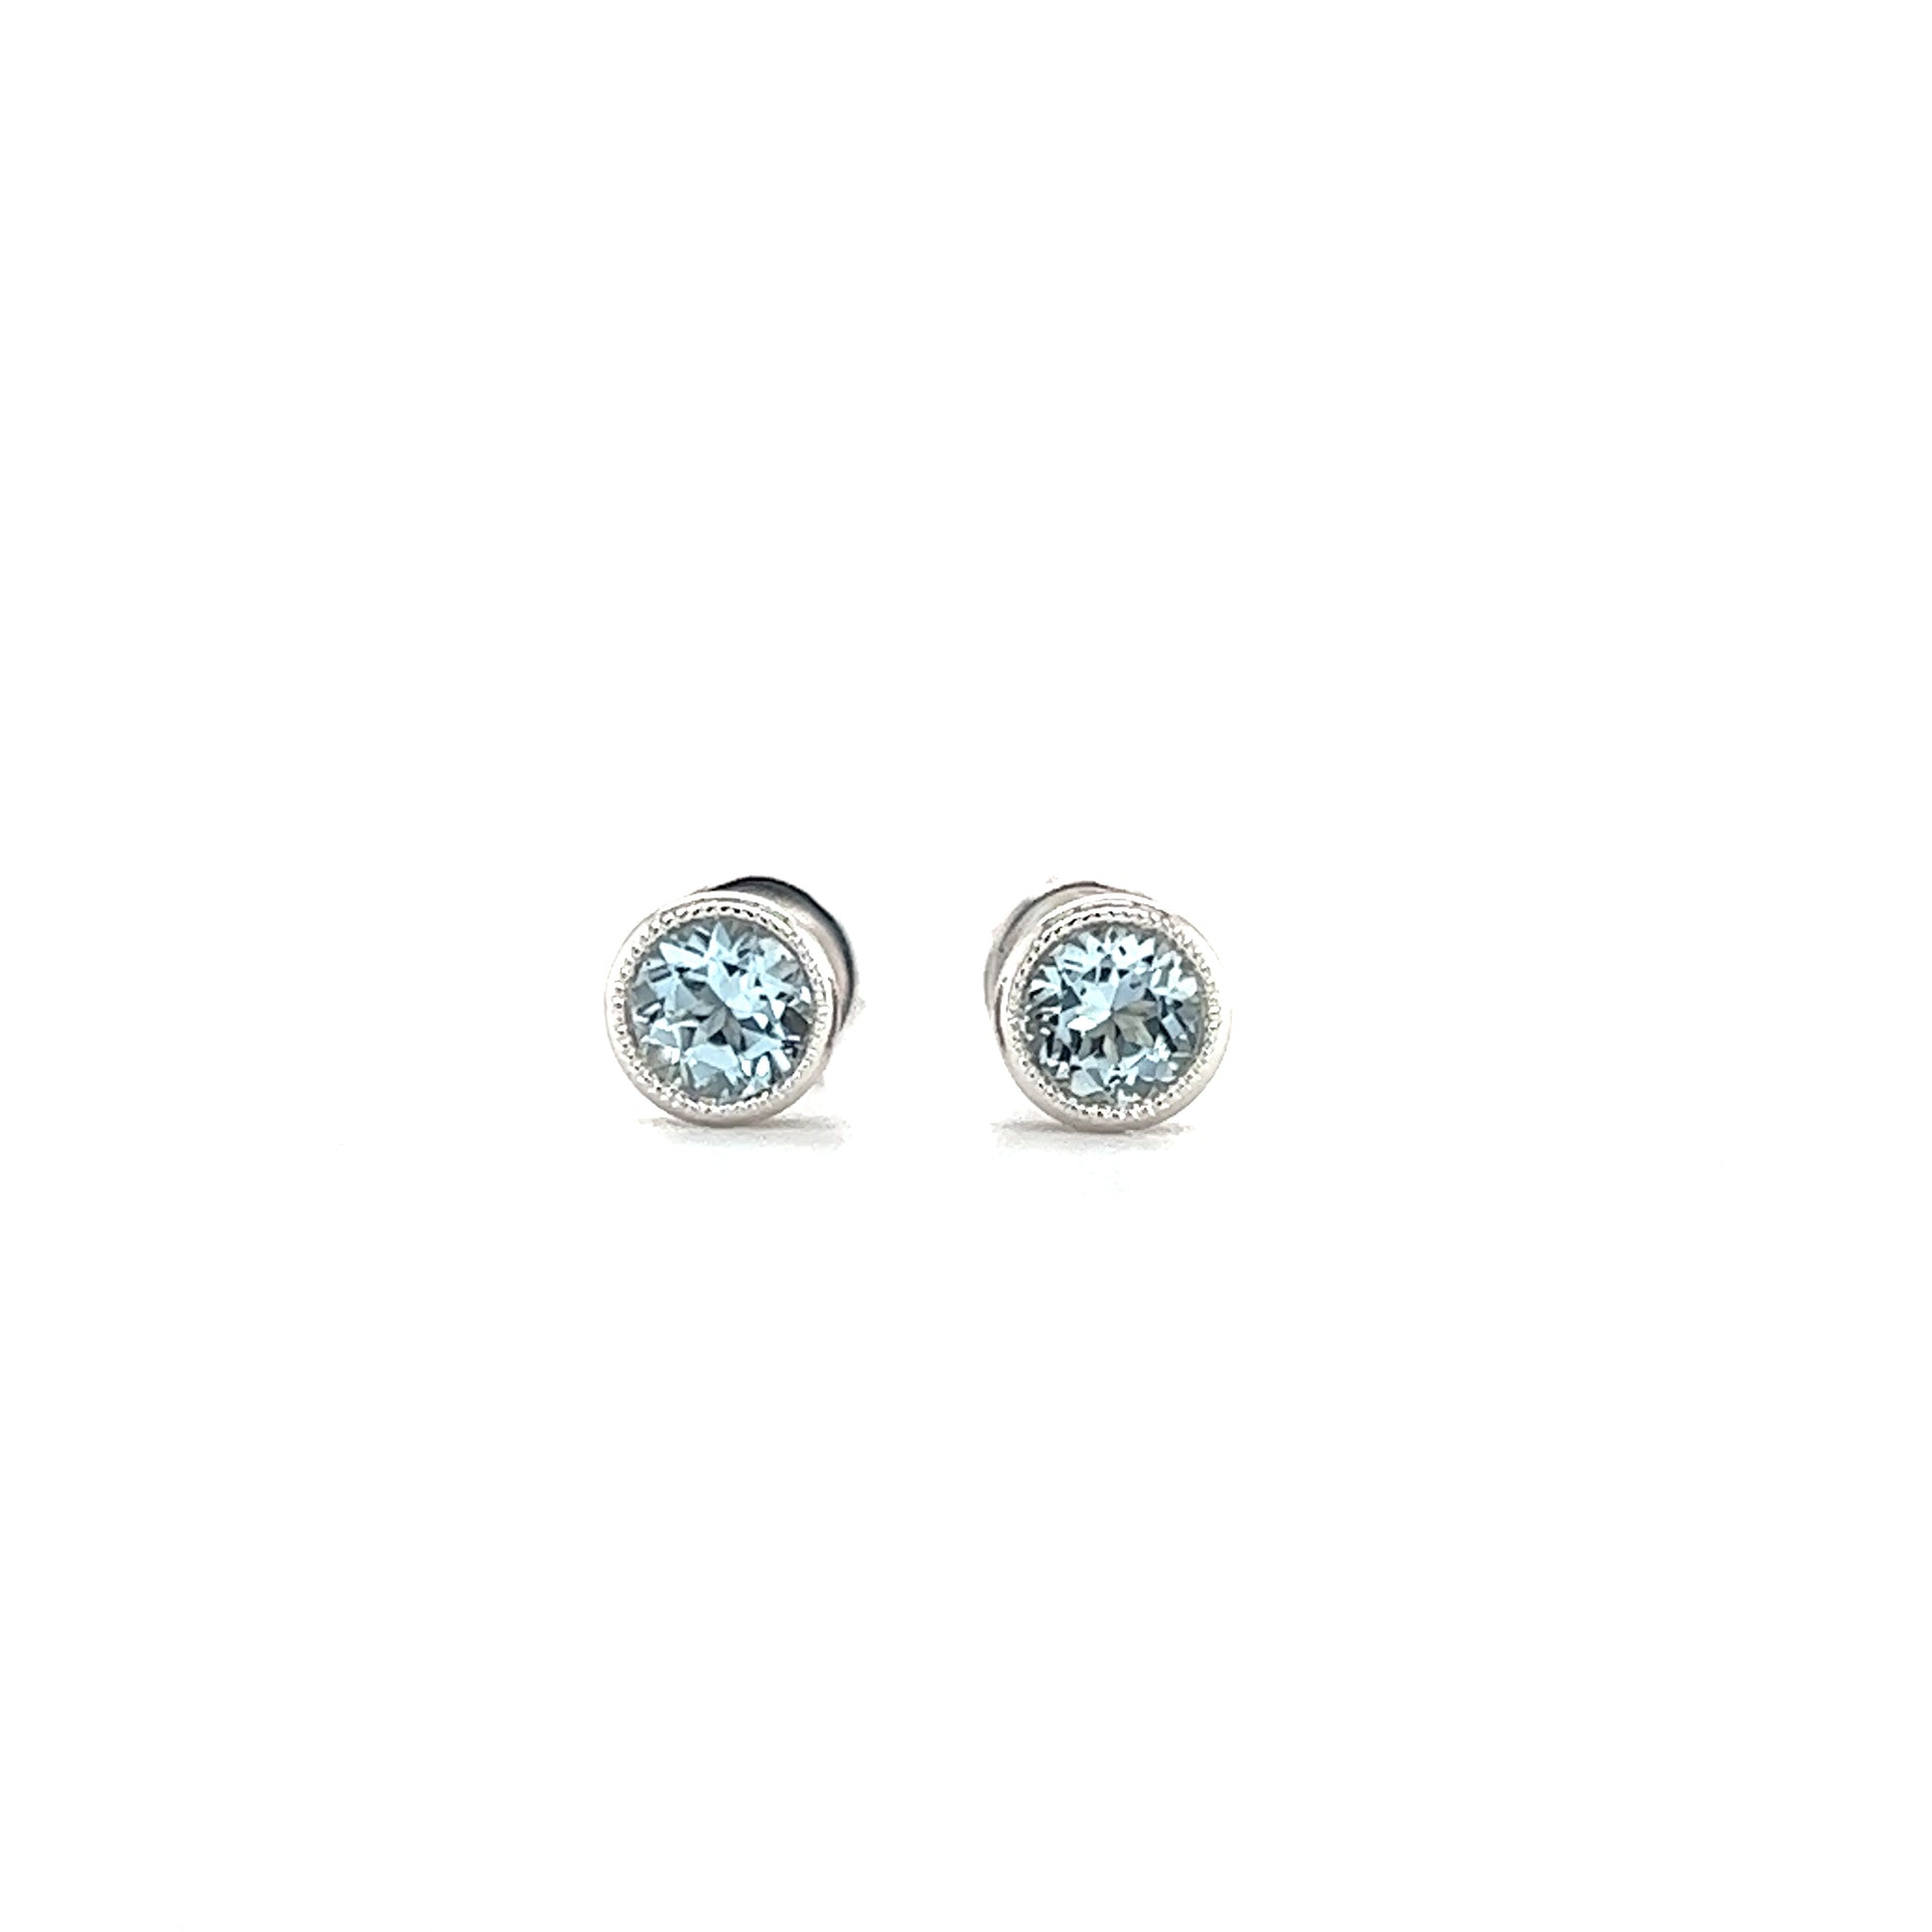 Round Aquamarine Stud Earrings with Filigree and Milgrain in 14K White Gold Front View